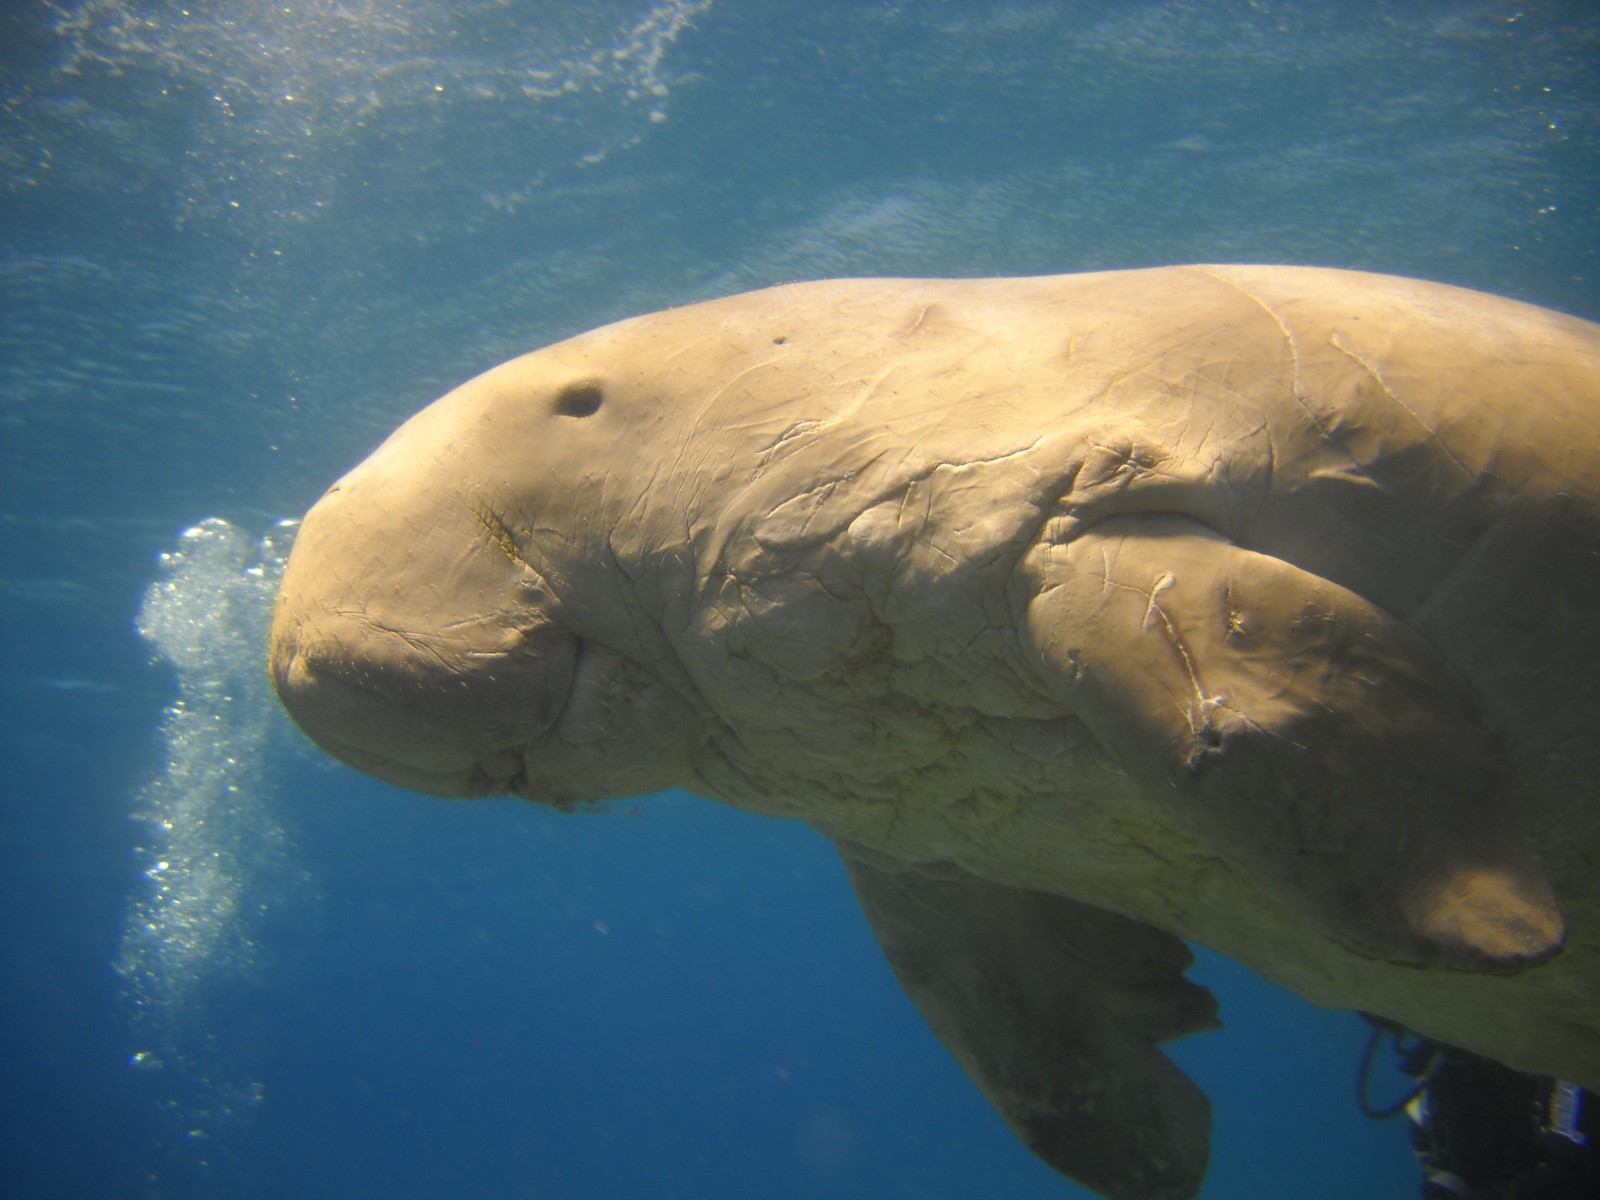 Dugong can be found in Tun Mustapha